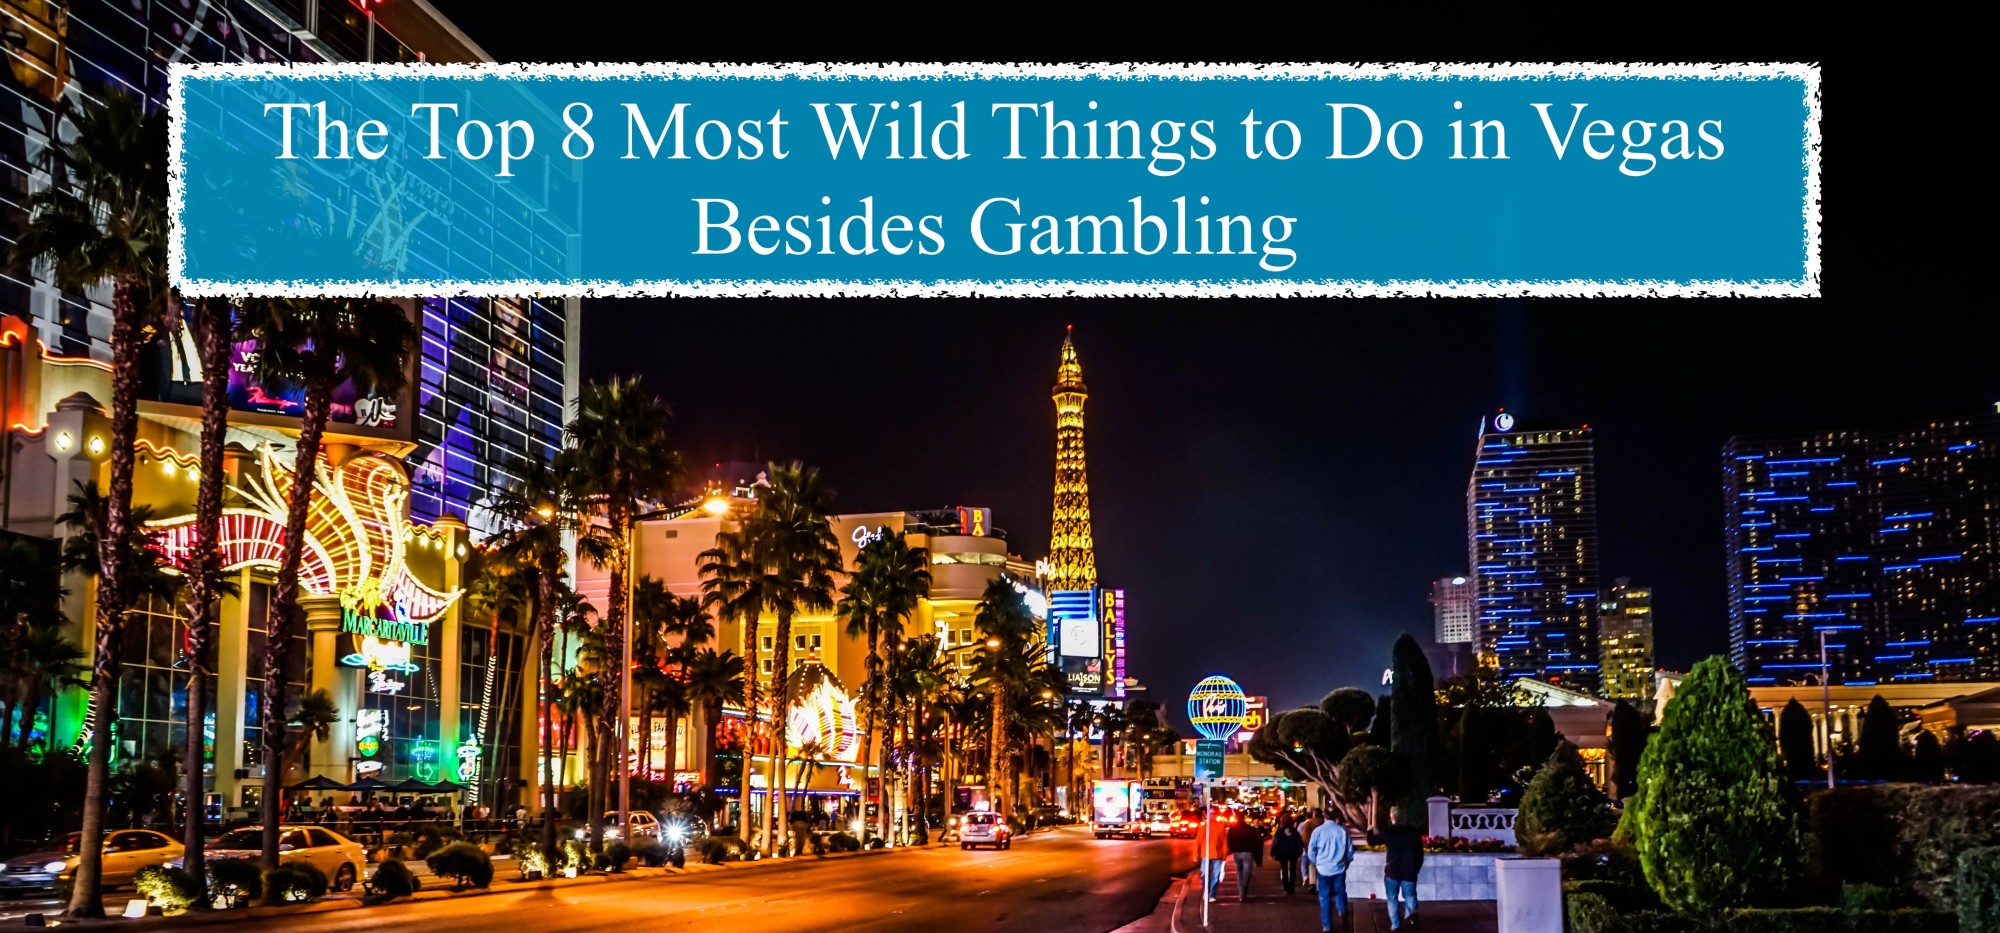 The Top 8 Most Wild Things to Do in Vegas Besides Gambling Lives On